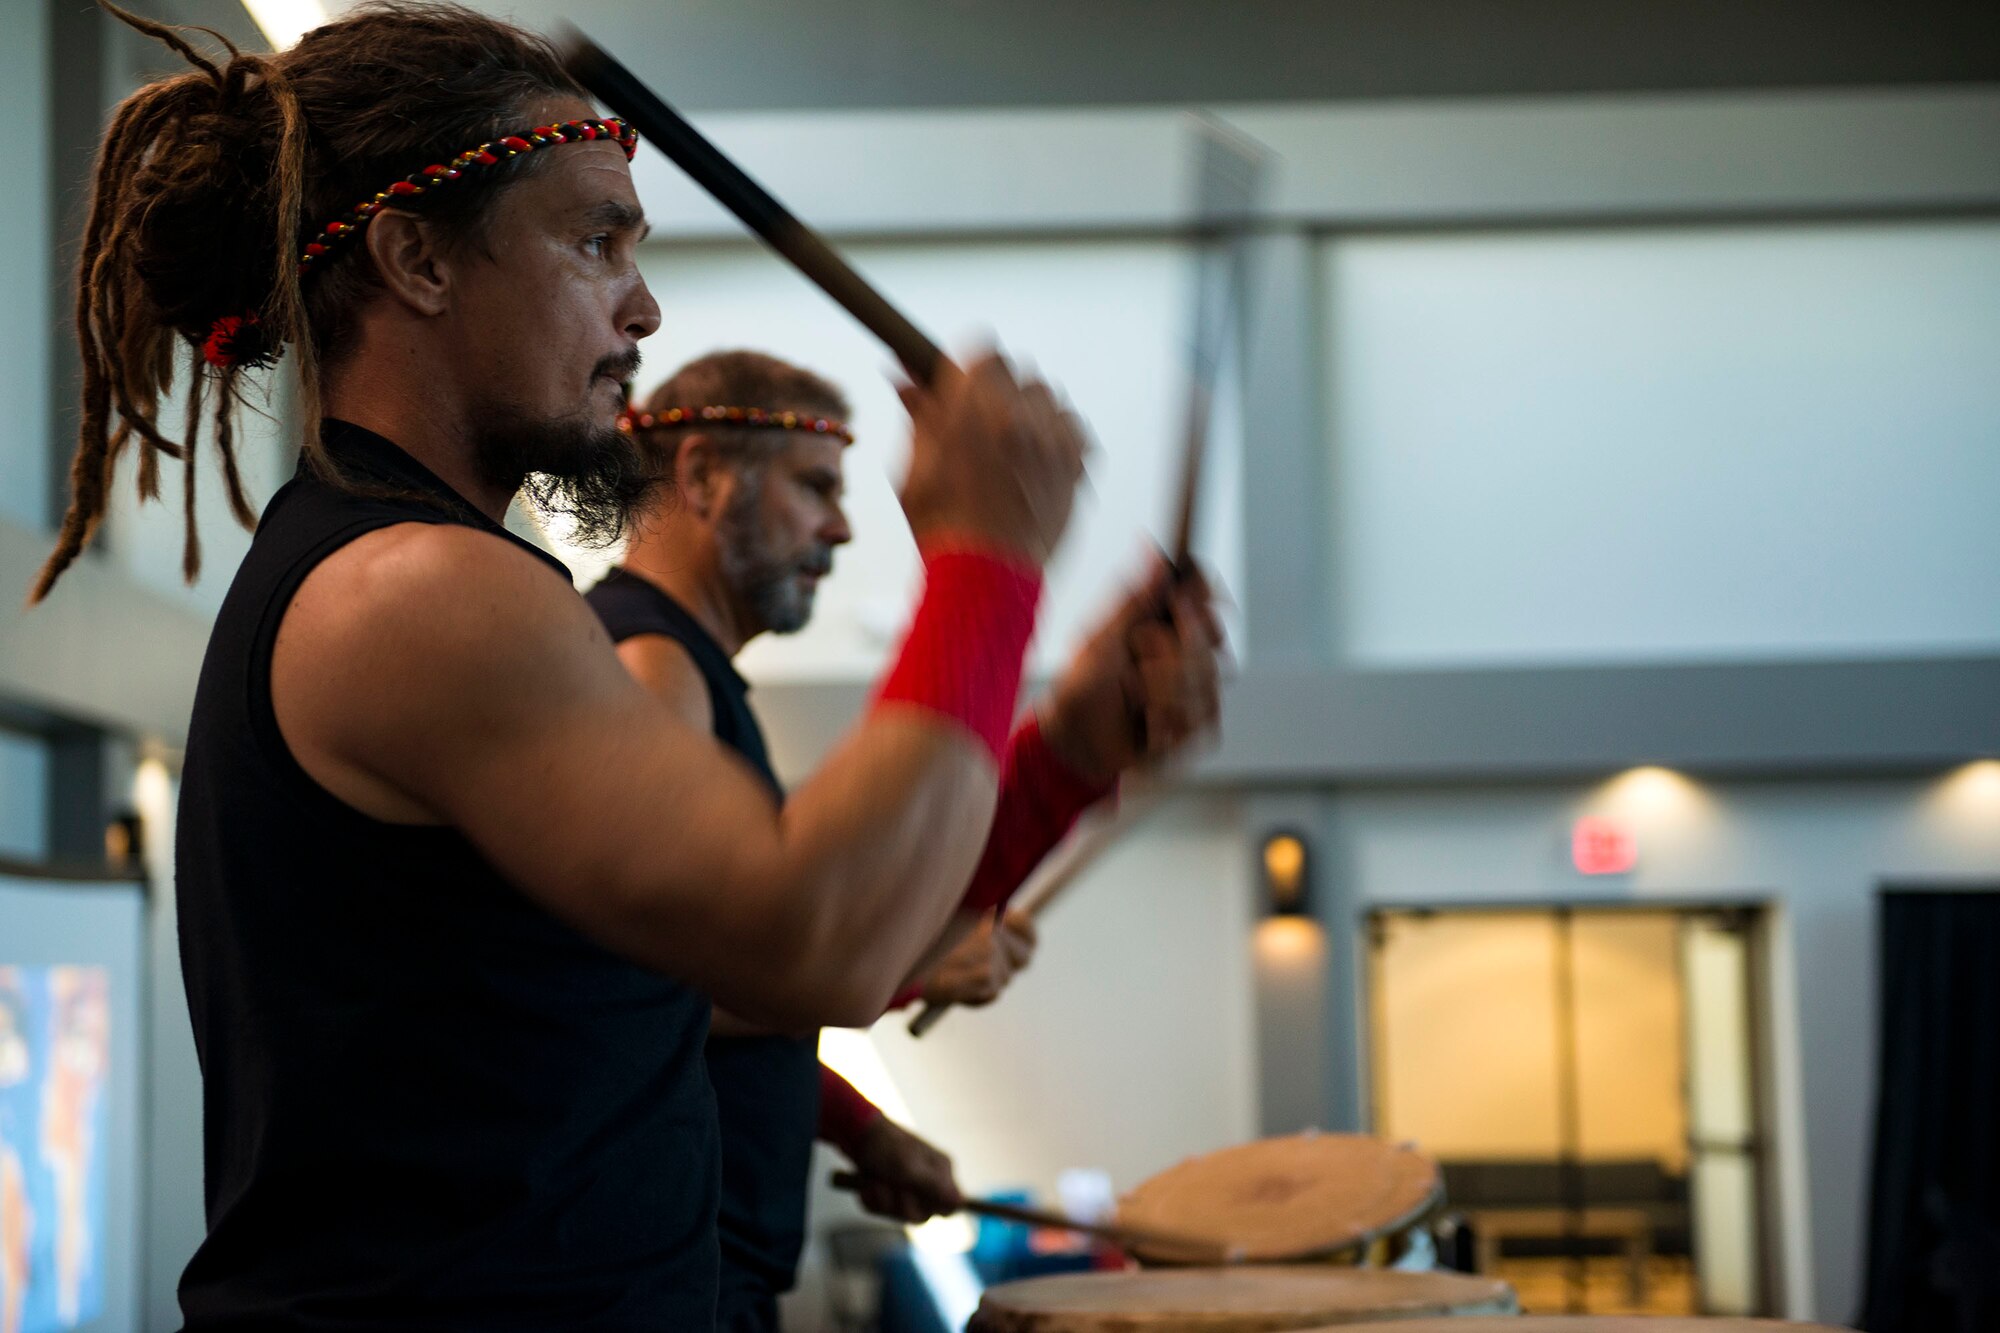 Tampa Taiko drummers perform at an event during the 23d Wing Diversity Day, Sept. 14, 2018, at Moody Air Force Base, Ga. Diversity Day honored the cultures of all groups and organizations observed by the Department of Defense using forms of expression such as poems and native dances. The theme of this year was ’Many Cultures, One Voice: Stronger Through Inclusion And Equality’. (U.S. Air Force photo by Airman 1st Class Erick Requadt)